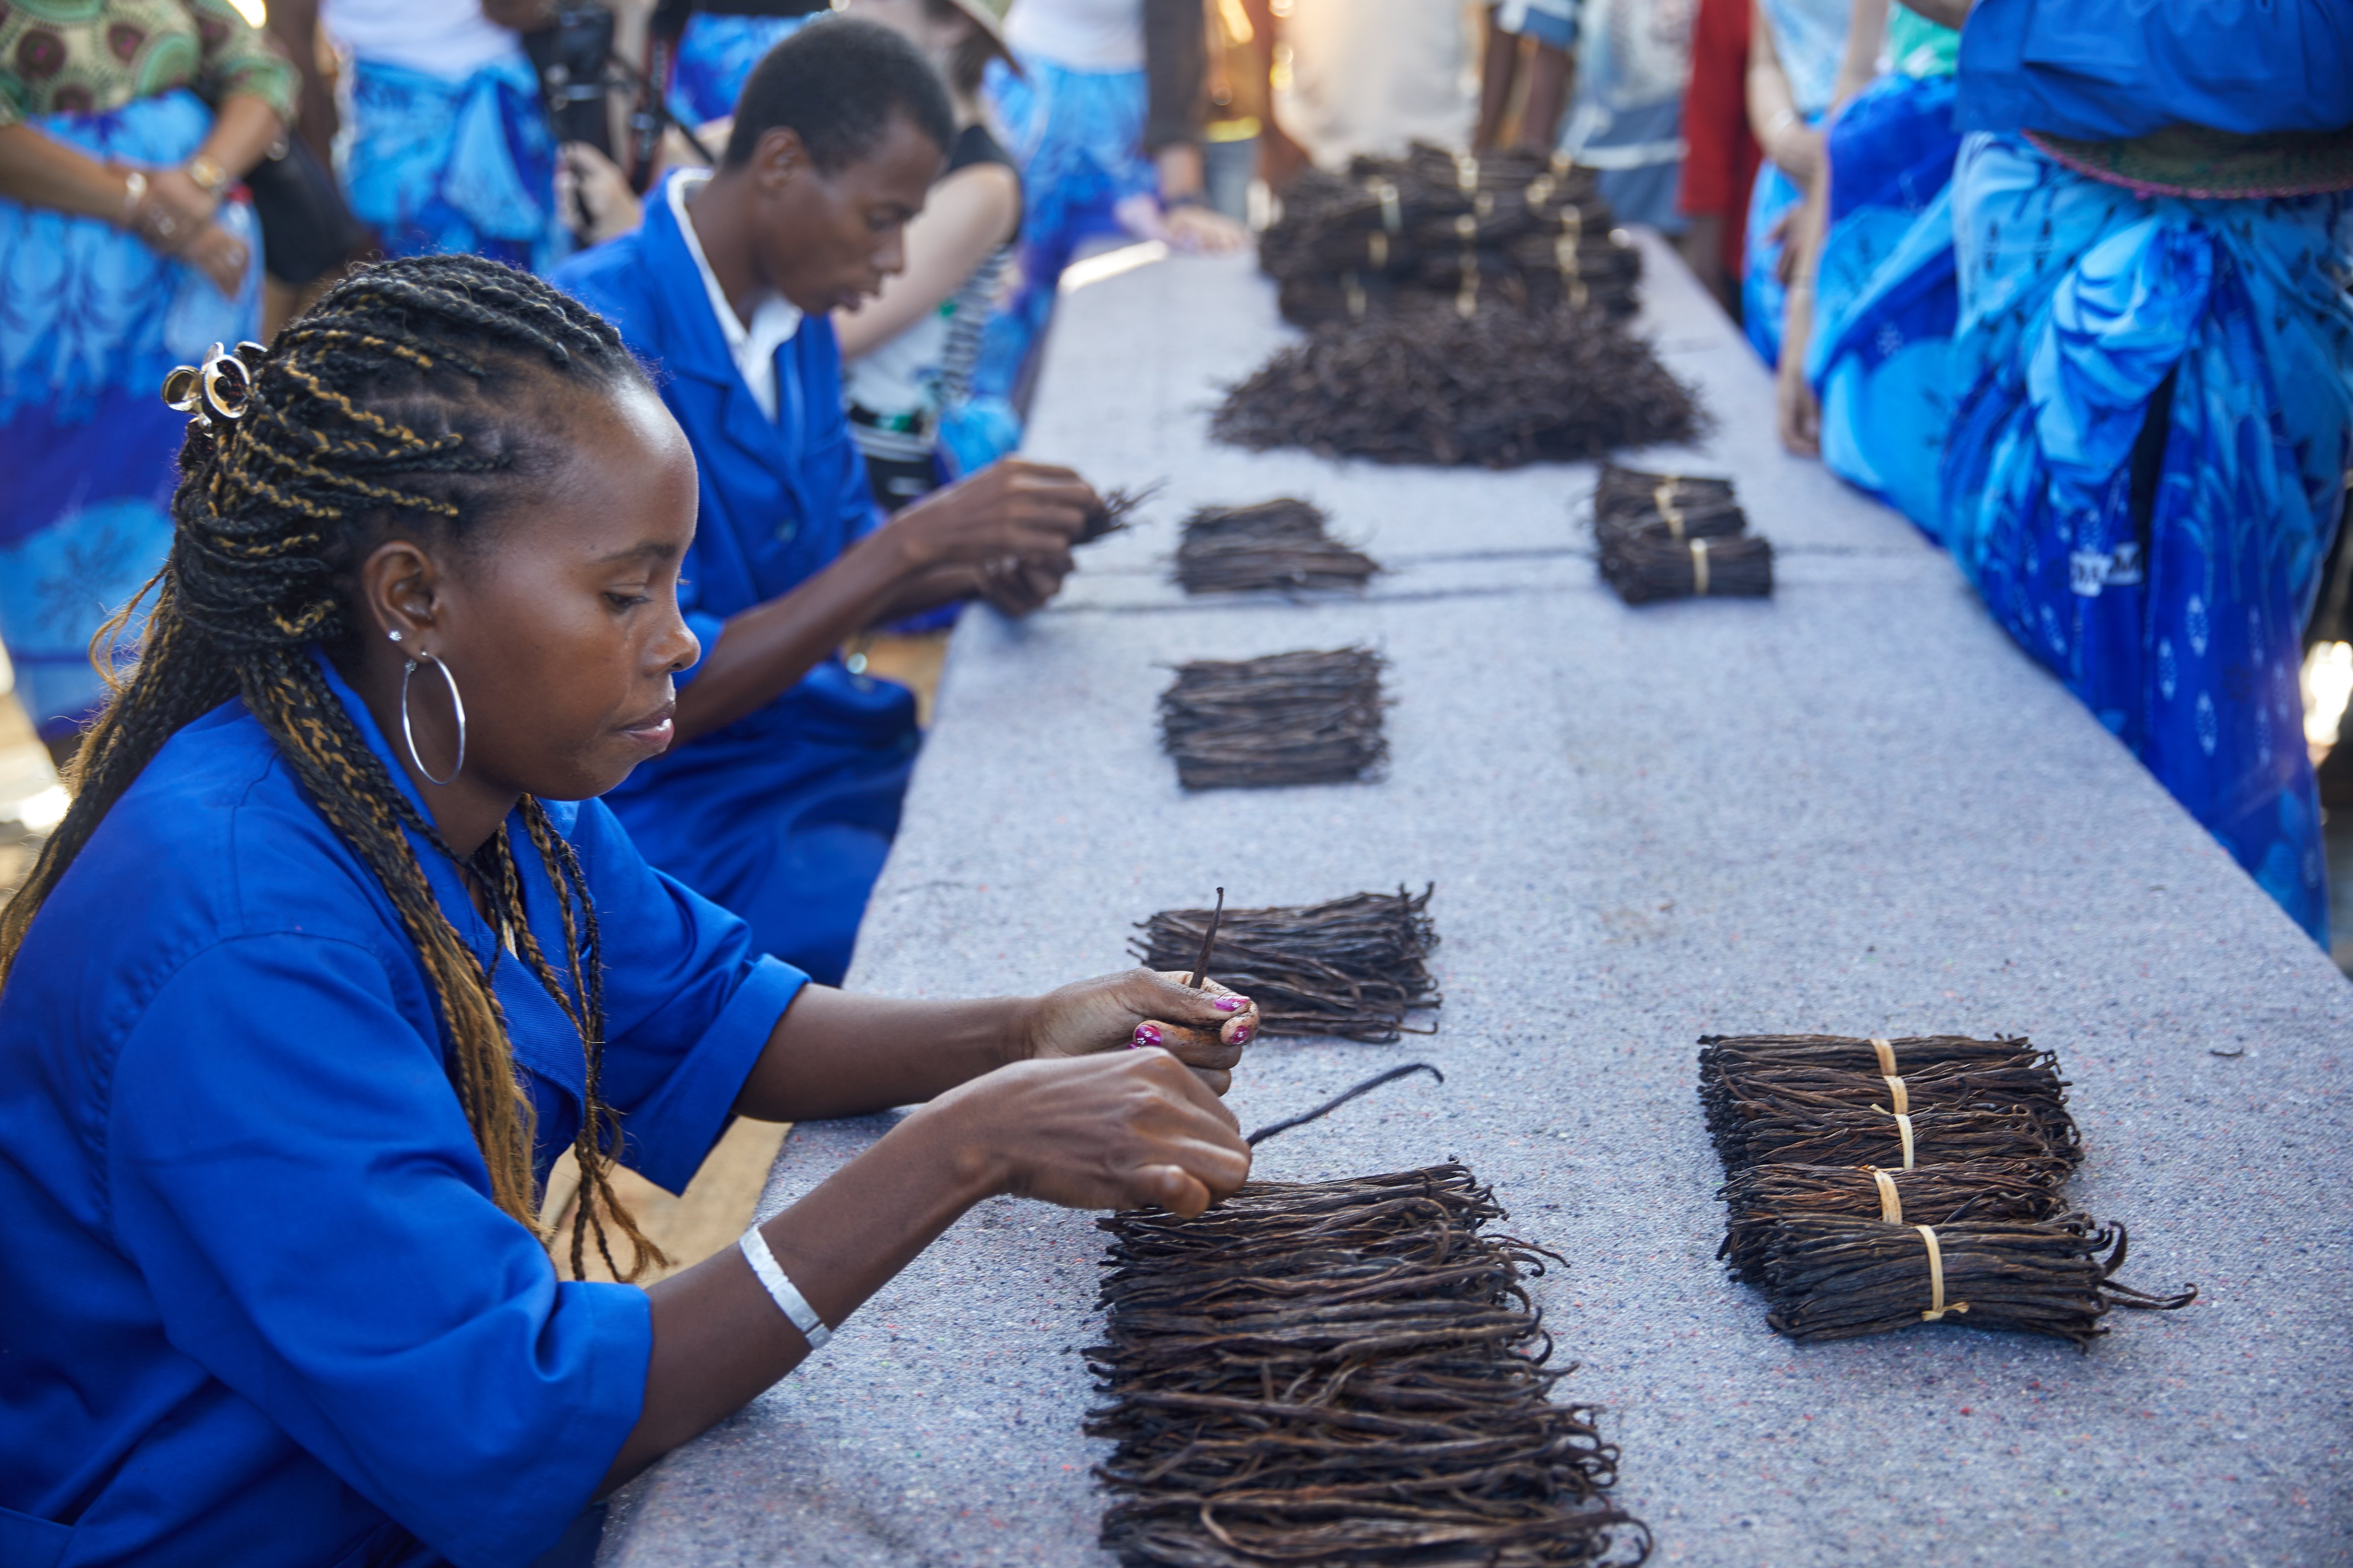 The price of vanilla was $515 per kilogram on June 1 2018. Silver was priced at $527 per kilogram. (Masy Andriantsoa/Livelihoods Funds)